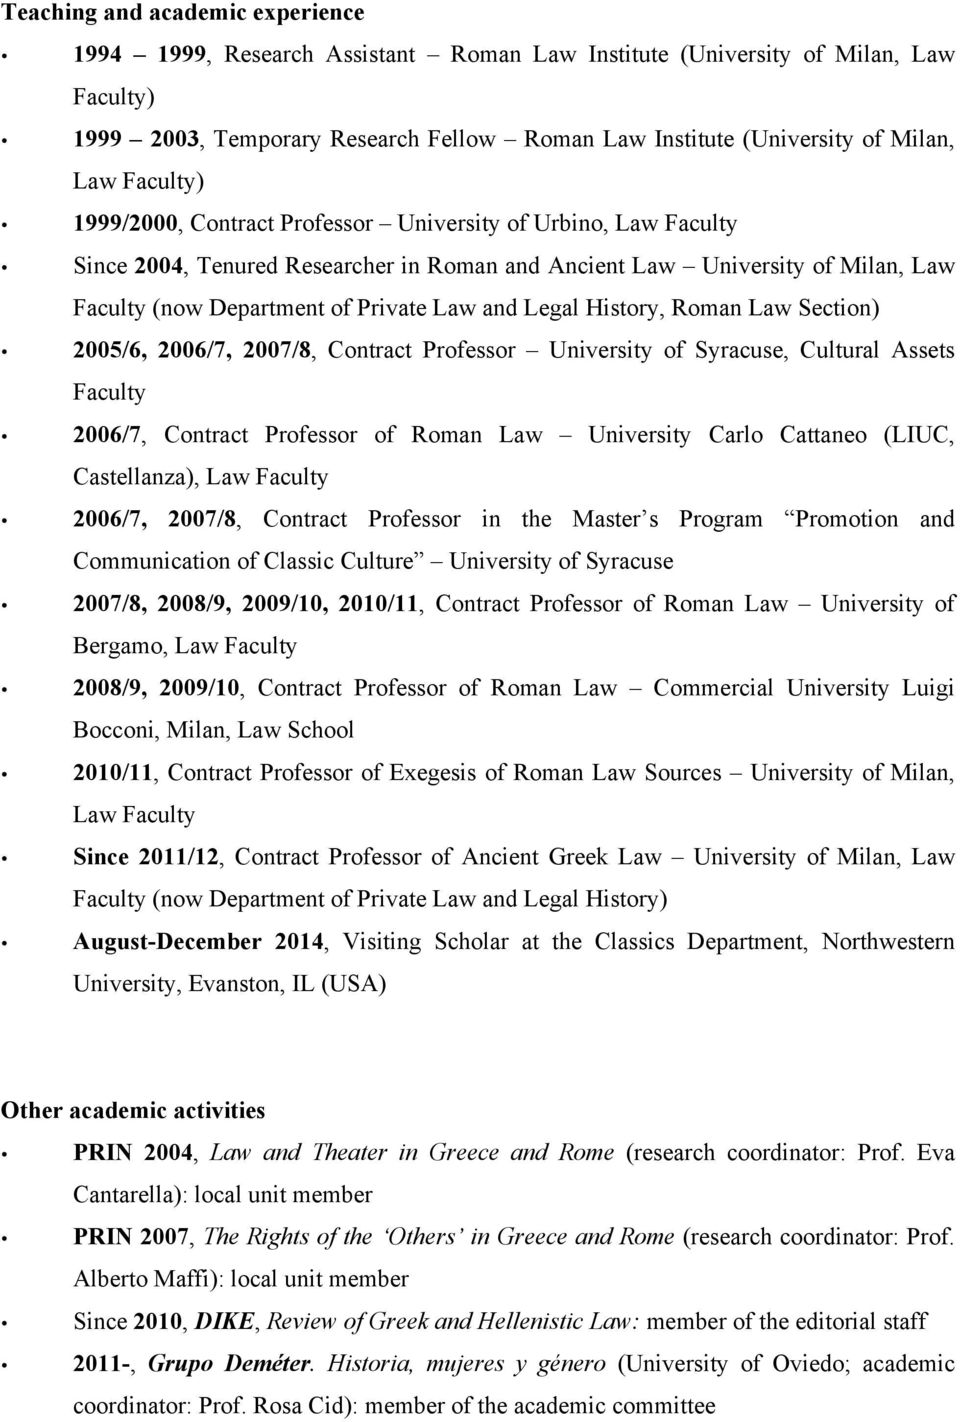 and Legal History, Roman Law Section) 2005/6, 2006/7, 2007/8, Contract Professor University of Syracuse, Cultural Assets Faculty 2006/7, Contract Professor of Roman Law University Carlo Cattaneo